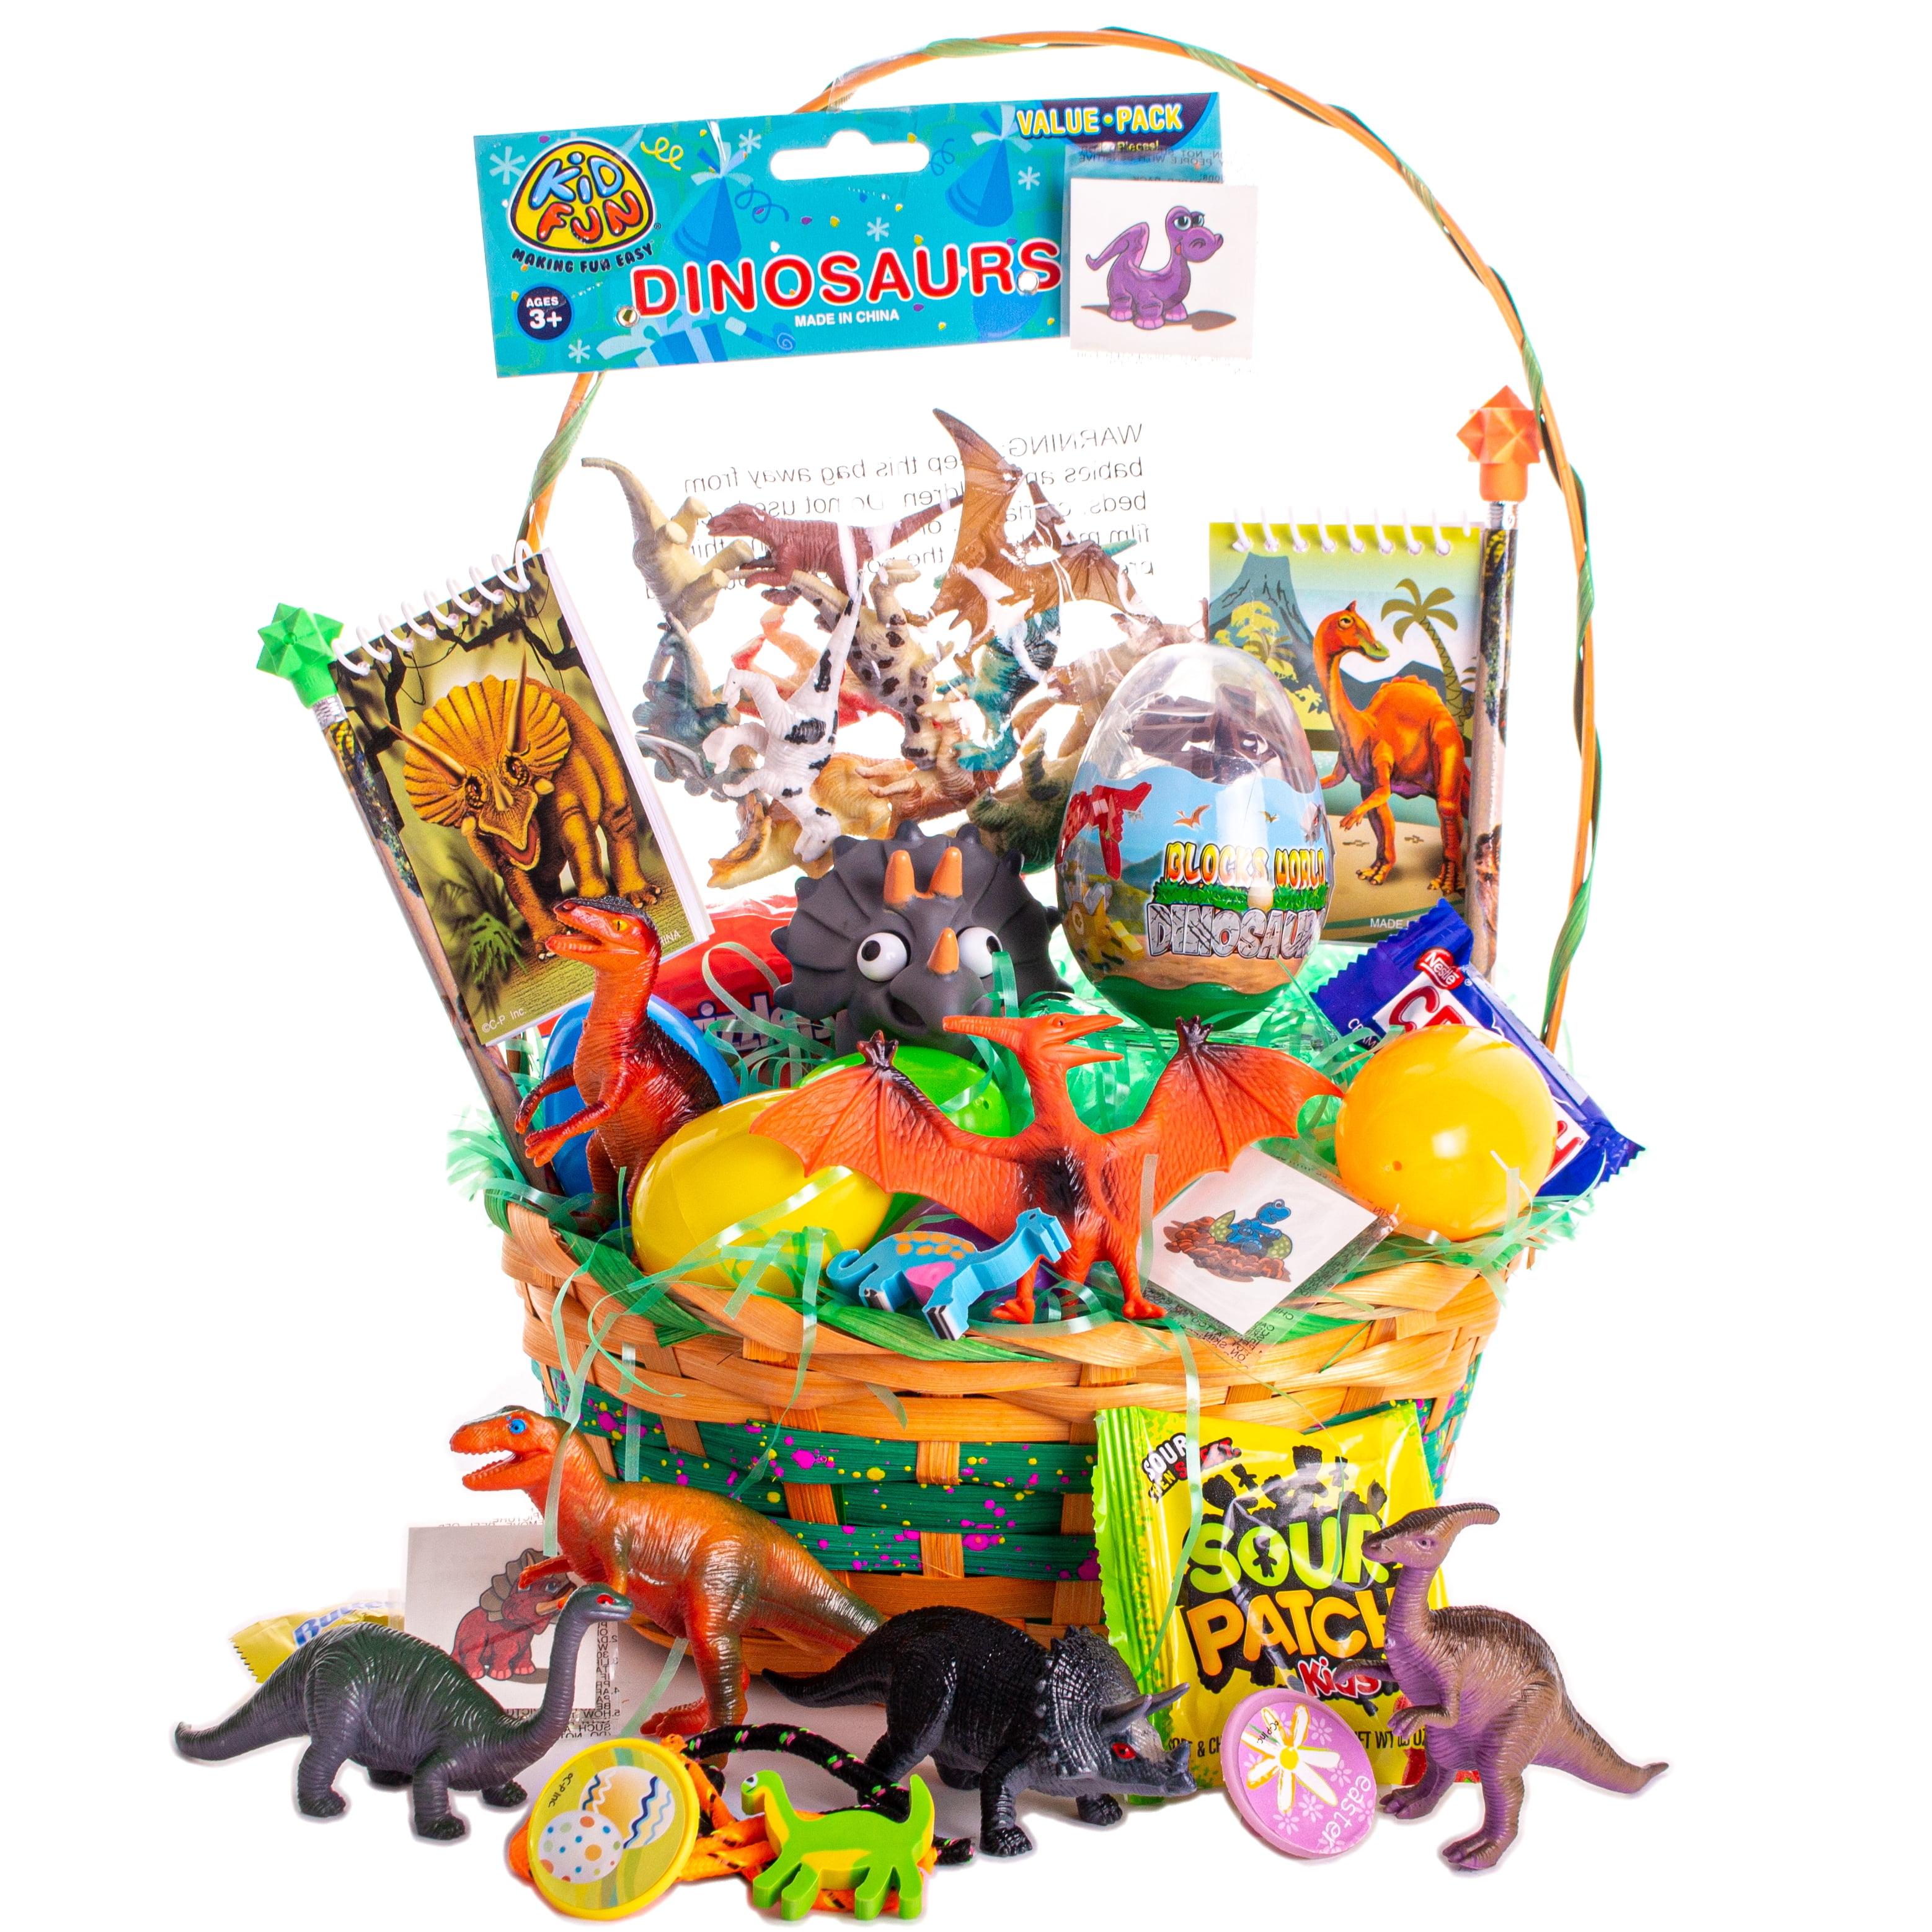 Easter Eggs Hunt Classroom Prize Supplies Easter Party Favor ThinkMax 12pcs Easter Eggs Prefilled with Jungle Animals and Dinosaurs Building Blocks for Easter Basket Stuffers 